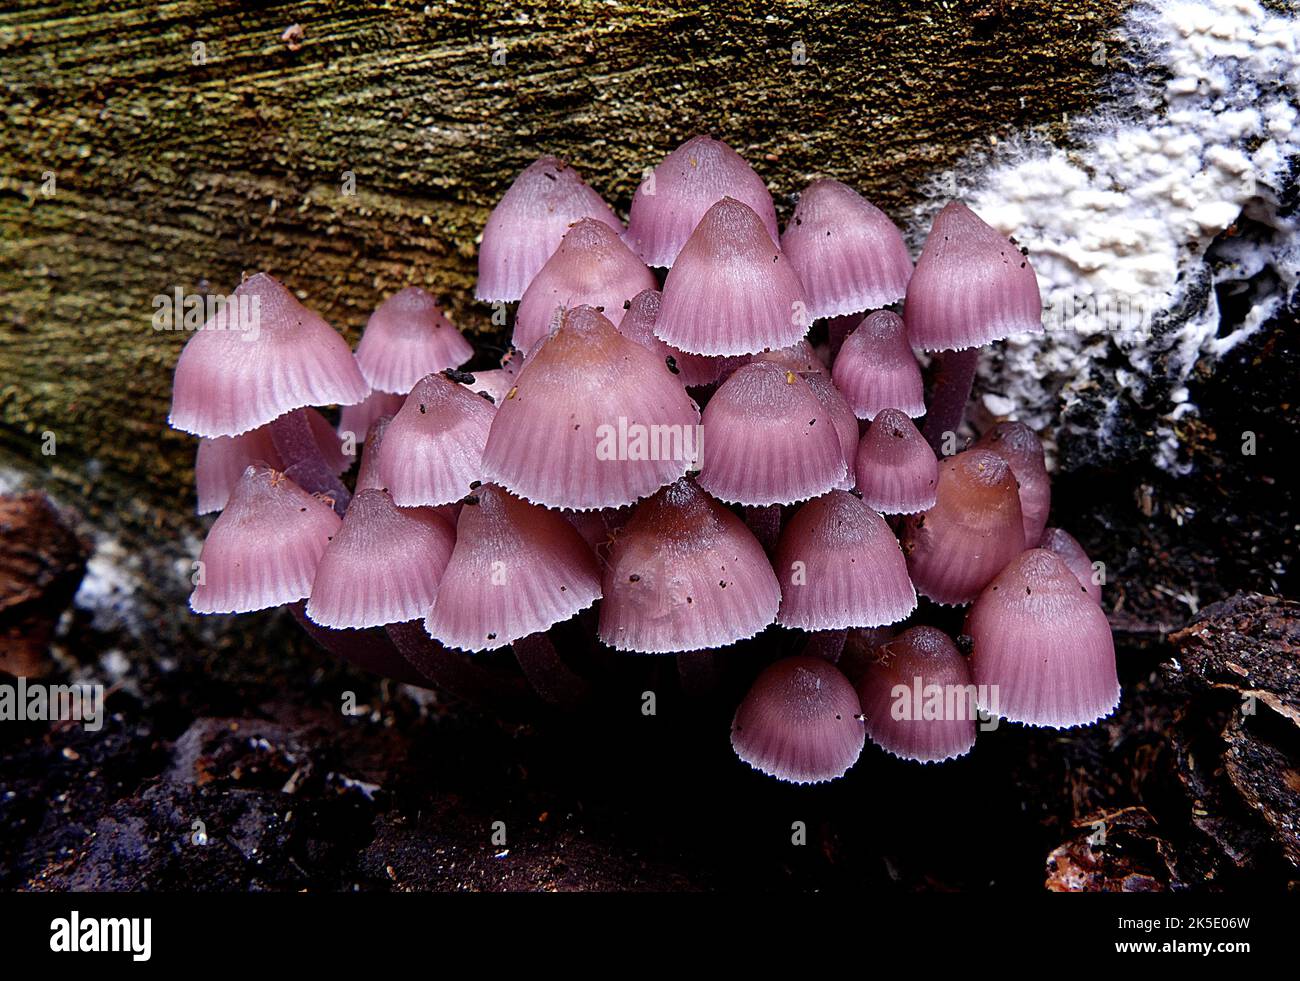 Mycena haematopus, commonly known as the bleeding fairy helmet, the burgundy drop bonnet, or the bleeding Mycena, is a species of fungus in the family Mycenaceae, of the order Agaricales. It is widespread and common in Europe and North America, and has also been collected in Japan and Venezuela. It is saprotrophicÑmeaning that it obtains nutrients by consuming decomposing organic matterÑand the fruit bodies appear in small groups or clusters on the decaying logs, trunks, and stumps of deciduous trees, particularly beech. Credit: BSpragg Stock Photo